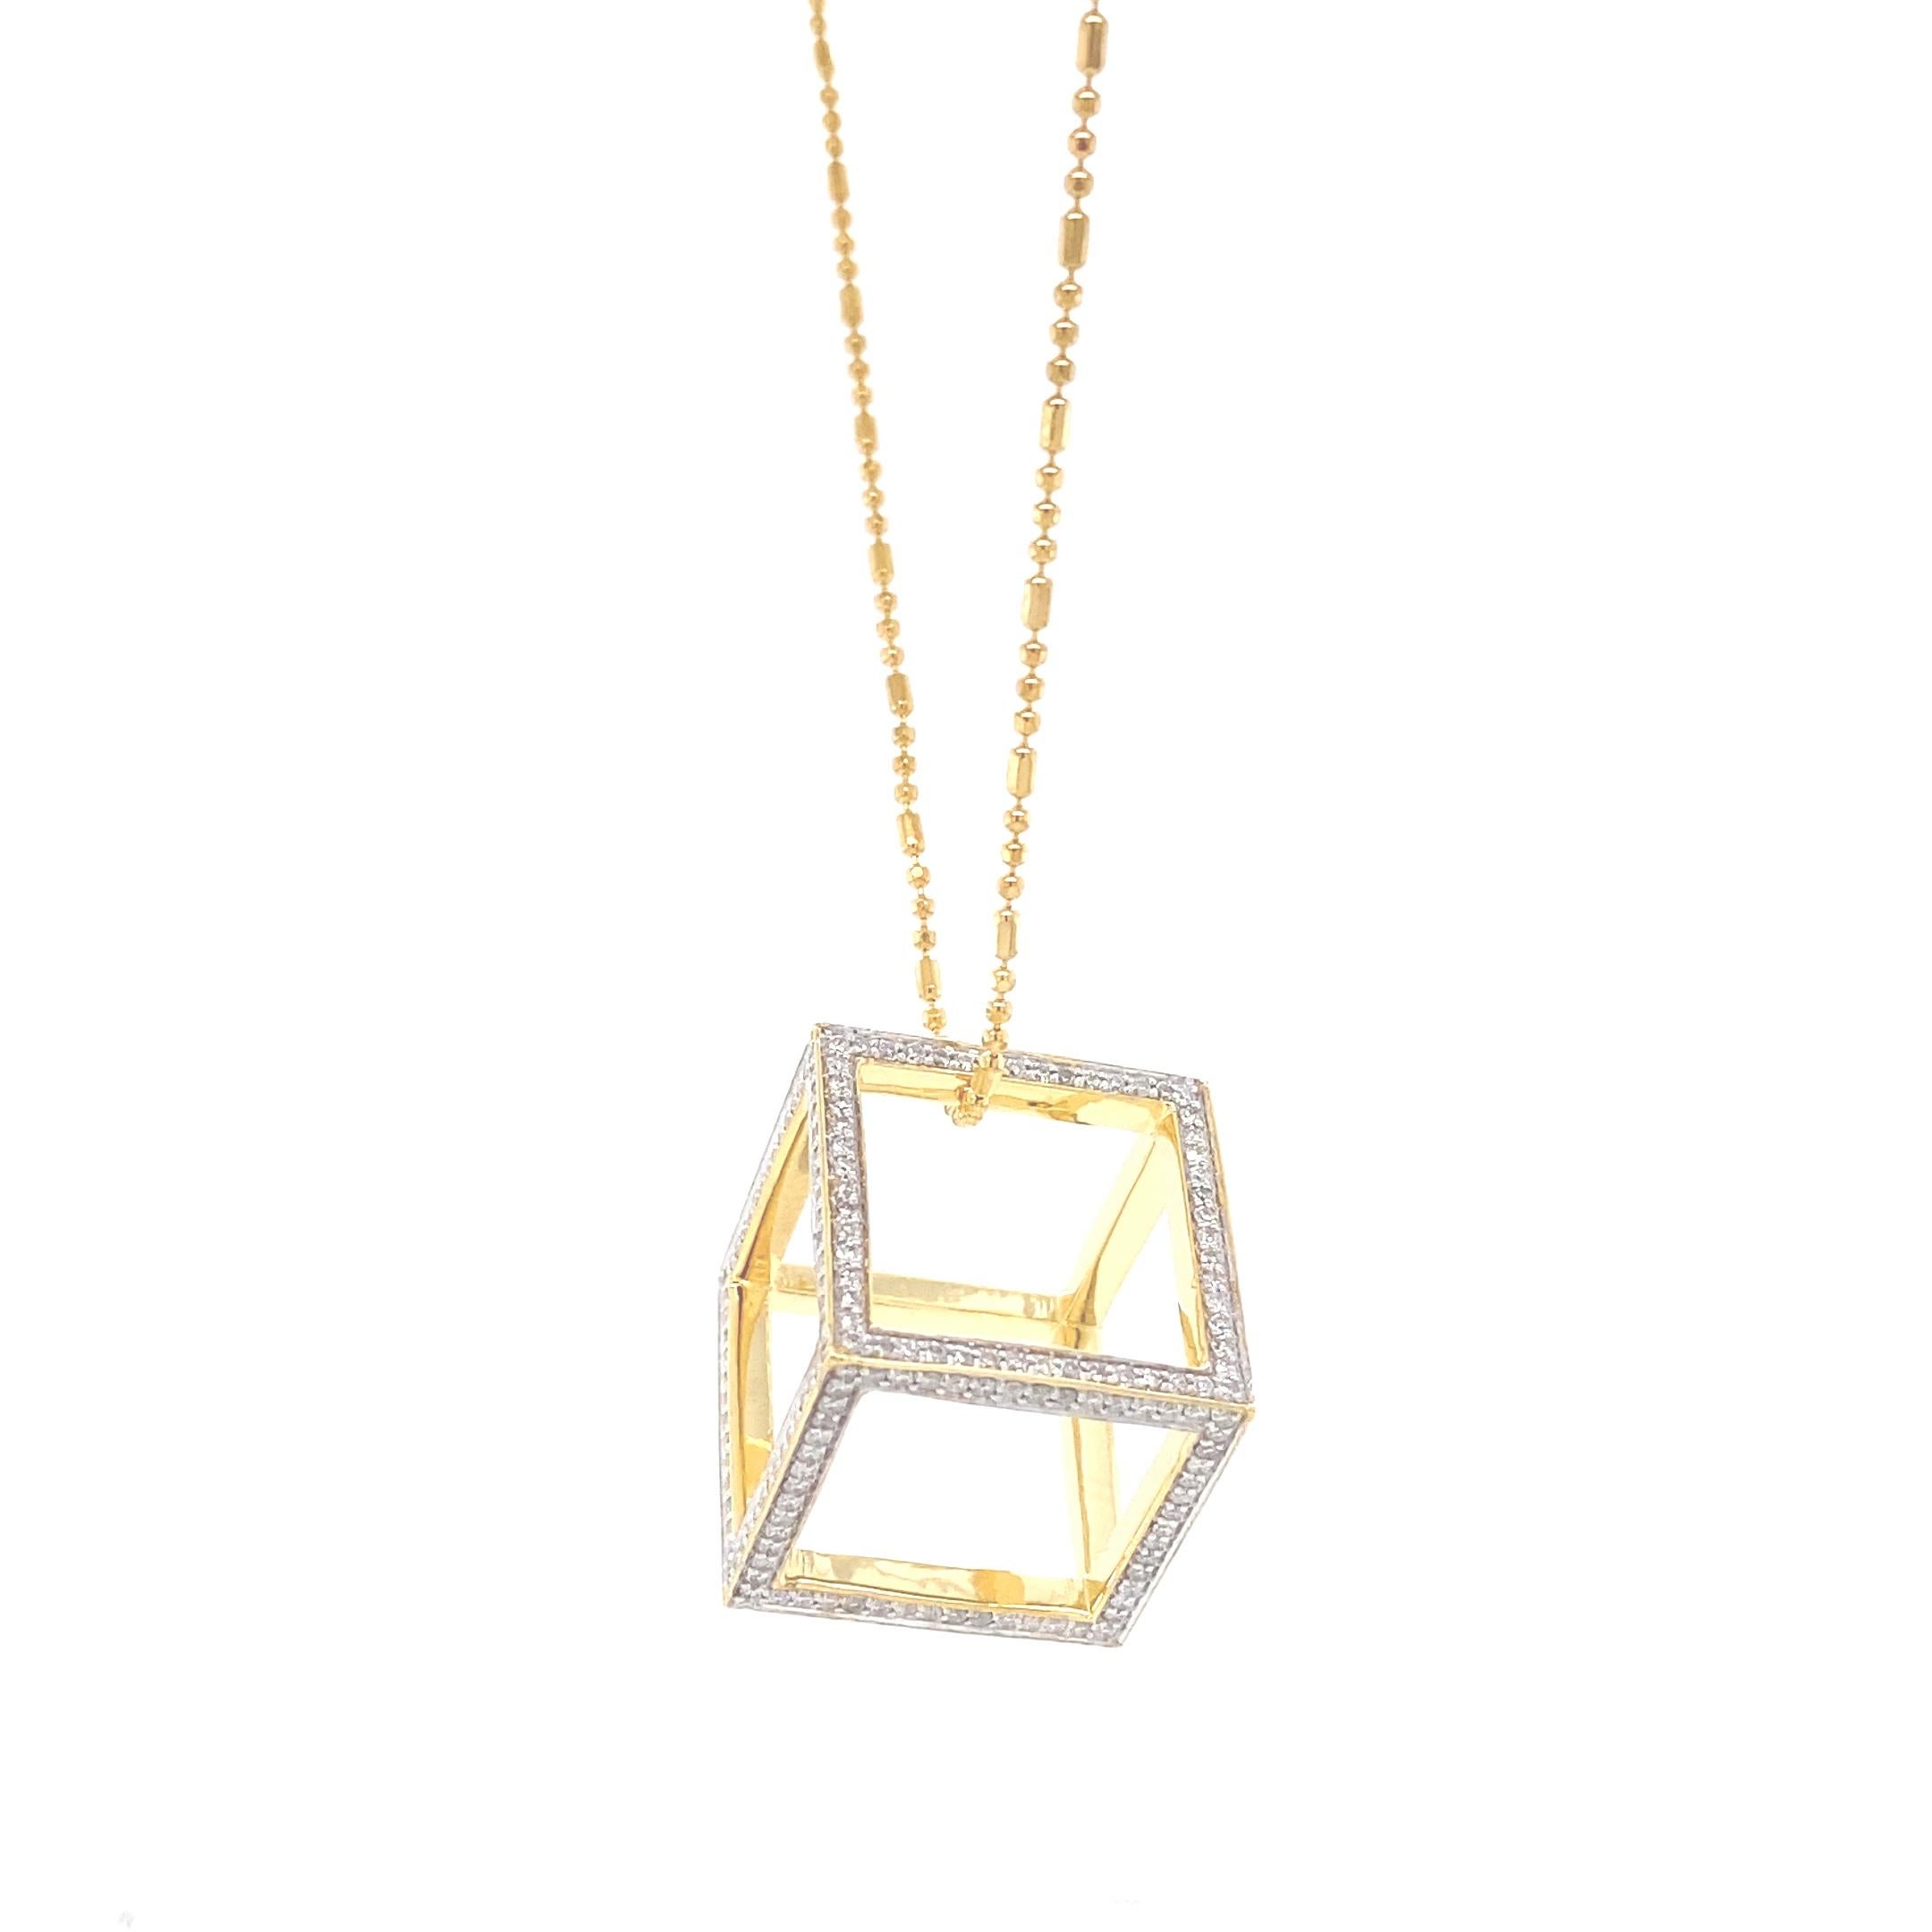 Presenting a masterfully crafted piece of artistry, features a captivating geometric pendant that exudes modern elegance. The luxurious pendant boasts a sleek gold finish, forming an open cube shape that makes a bold statement. Adorning the edges of